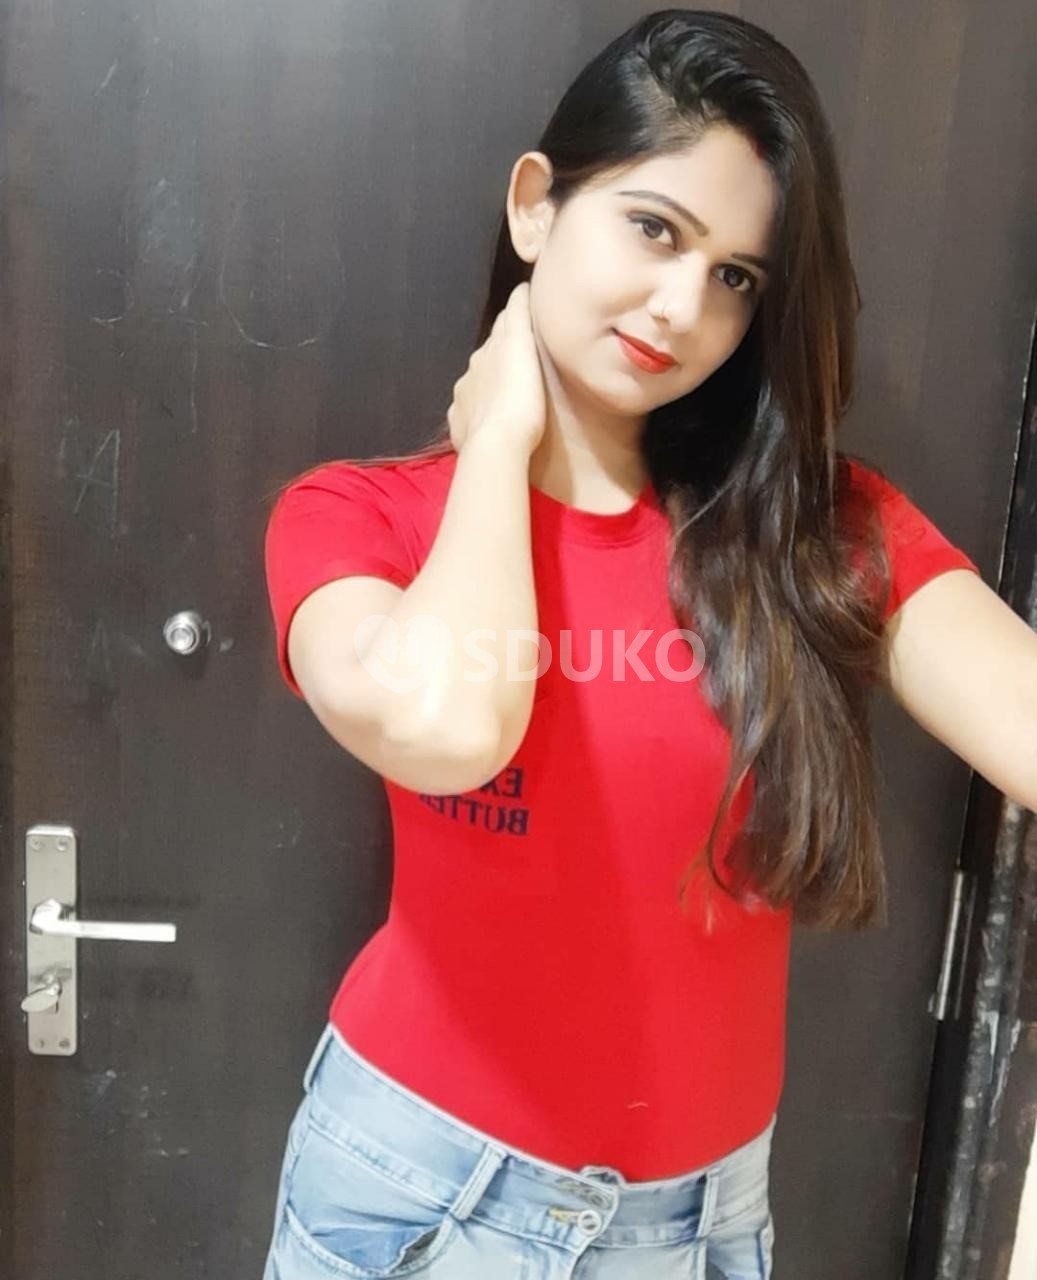 Jodhpur ☎️ VIP LOW RATE (Kavya) ESCORT FULL HARD FUCK WITH NAUGHTY IF YOU WANT TO FUCK MY PUSSY WITH BIG BOOBS GIRLS